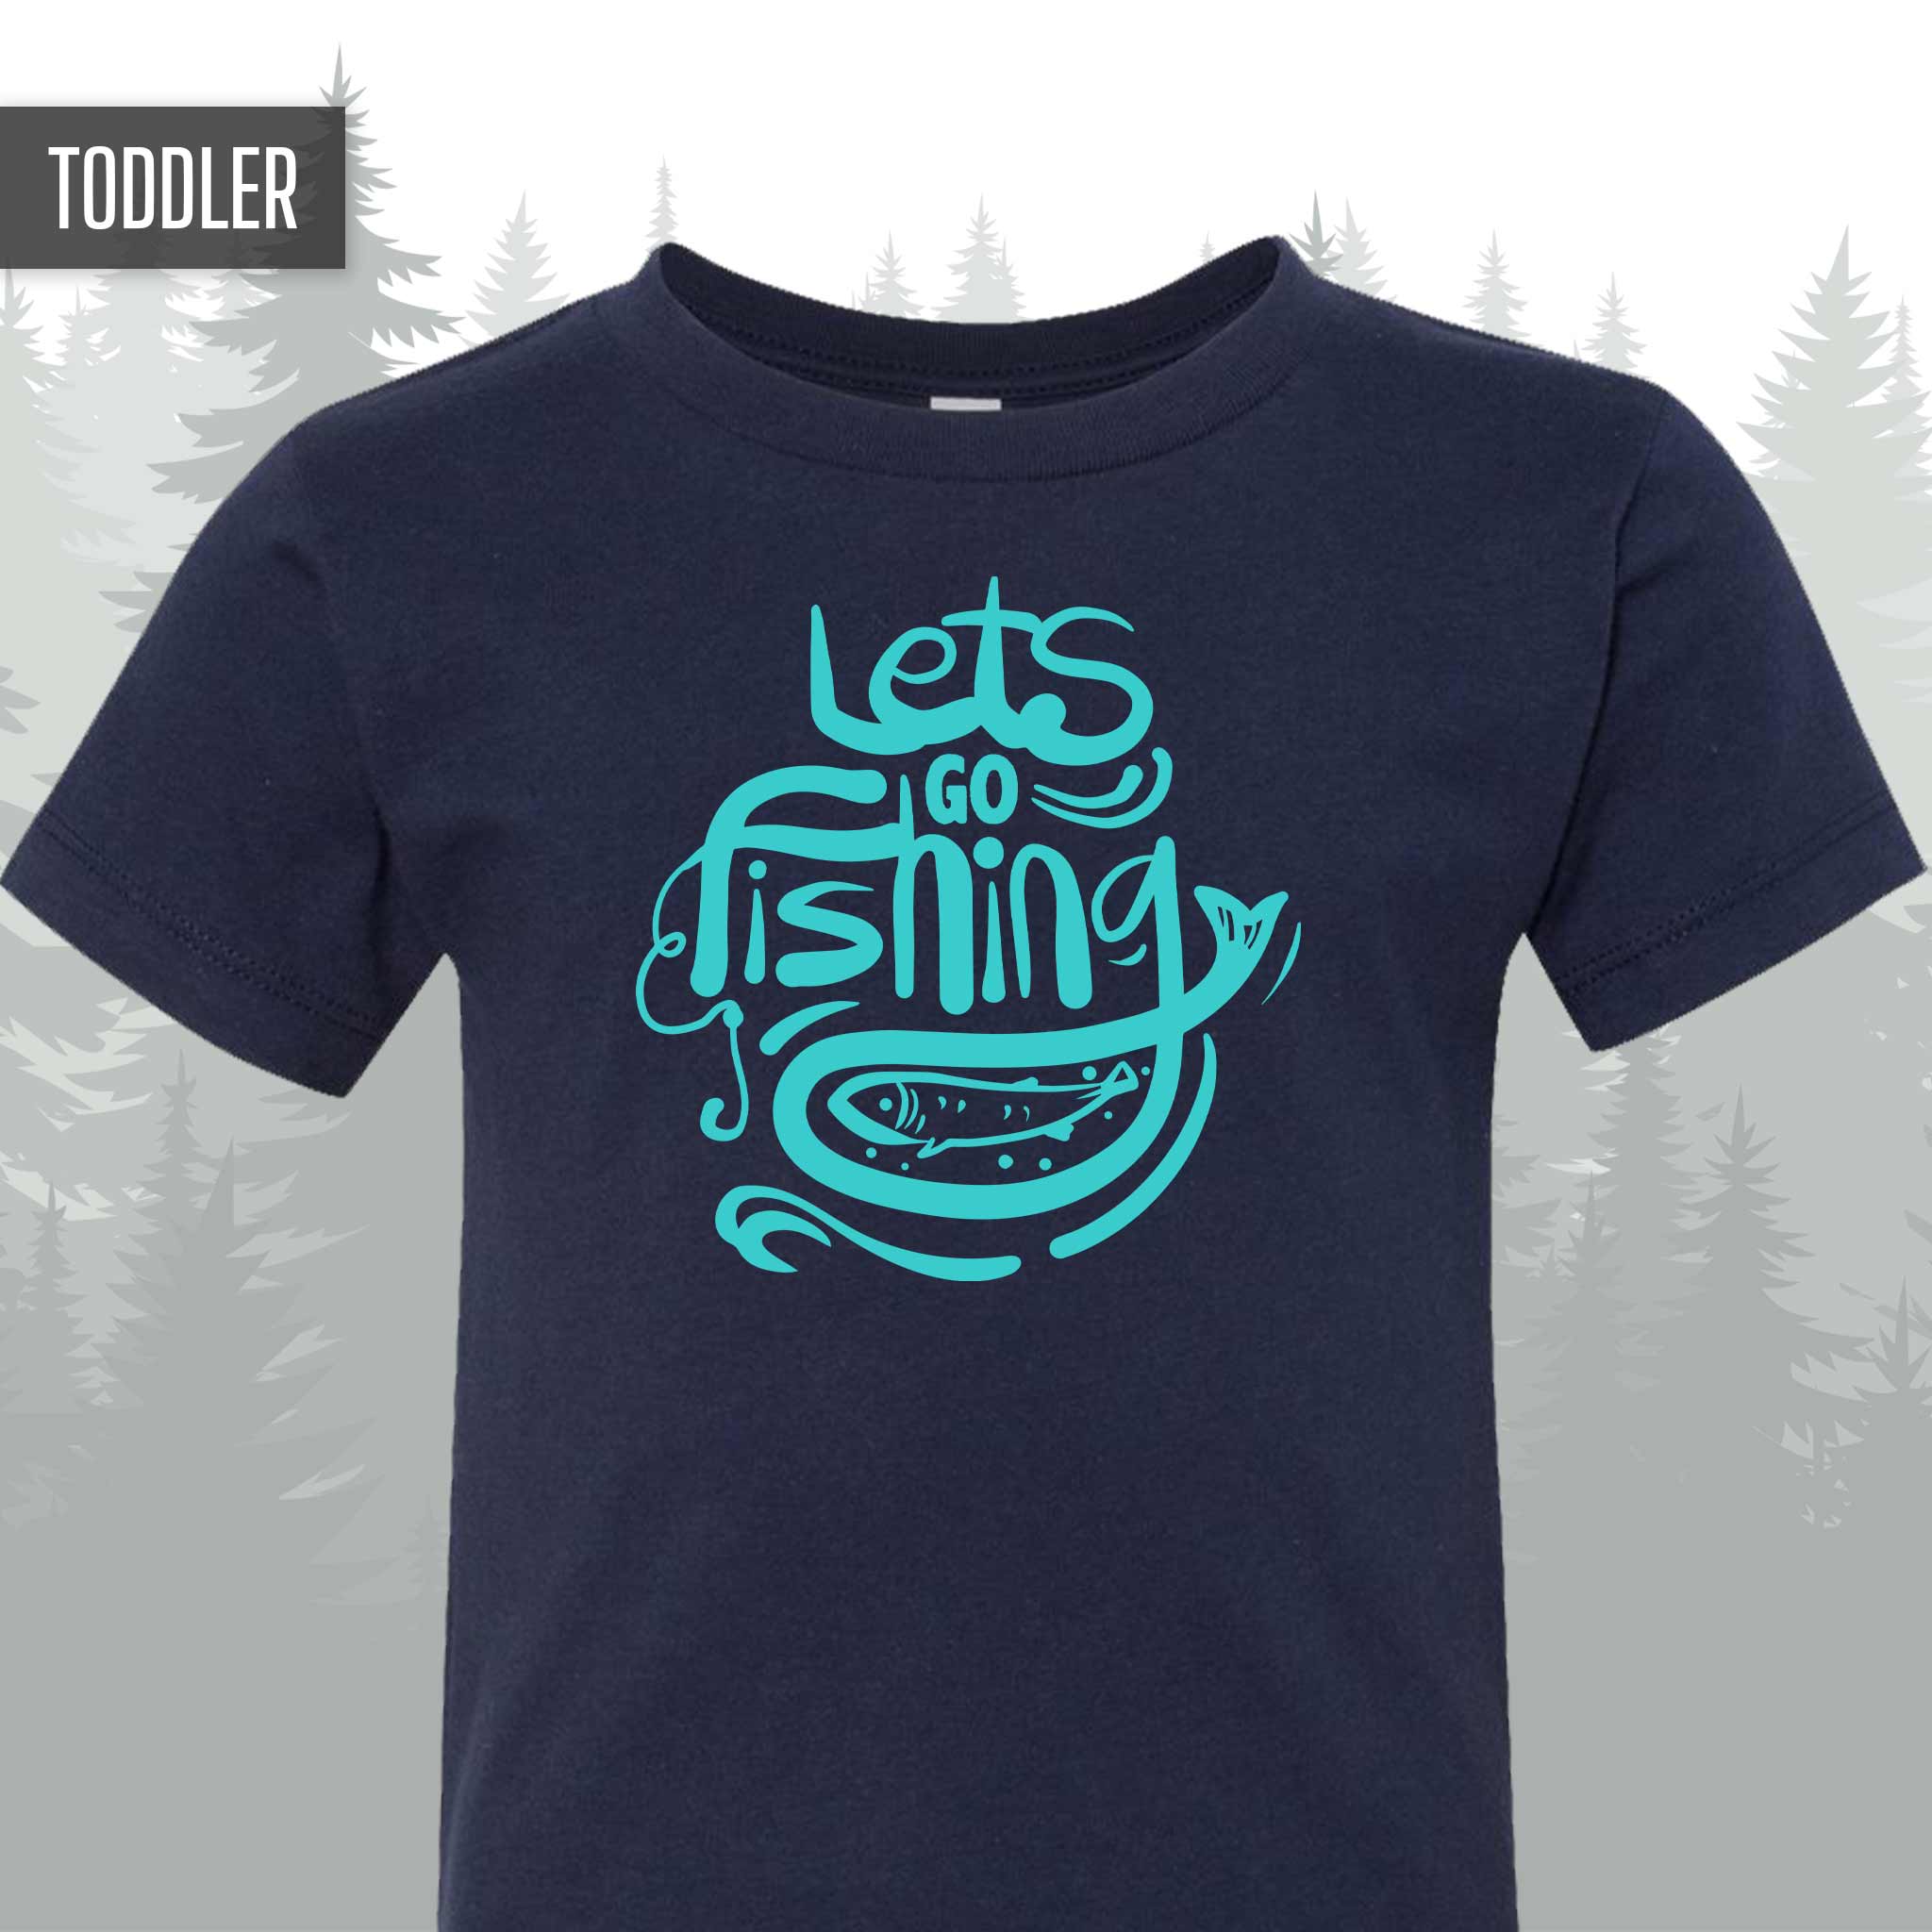 Let's Go Fishing Toddler T-Shirt – Discover the Outdoors